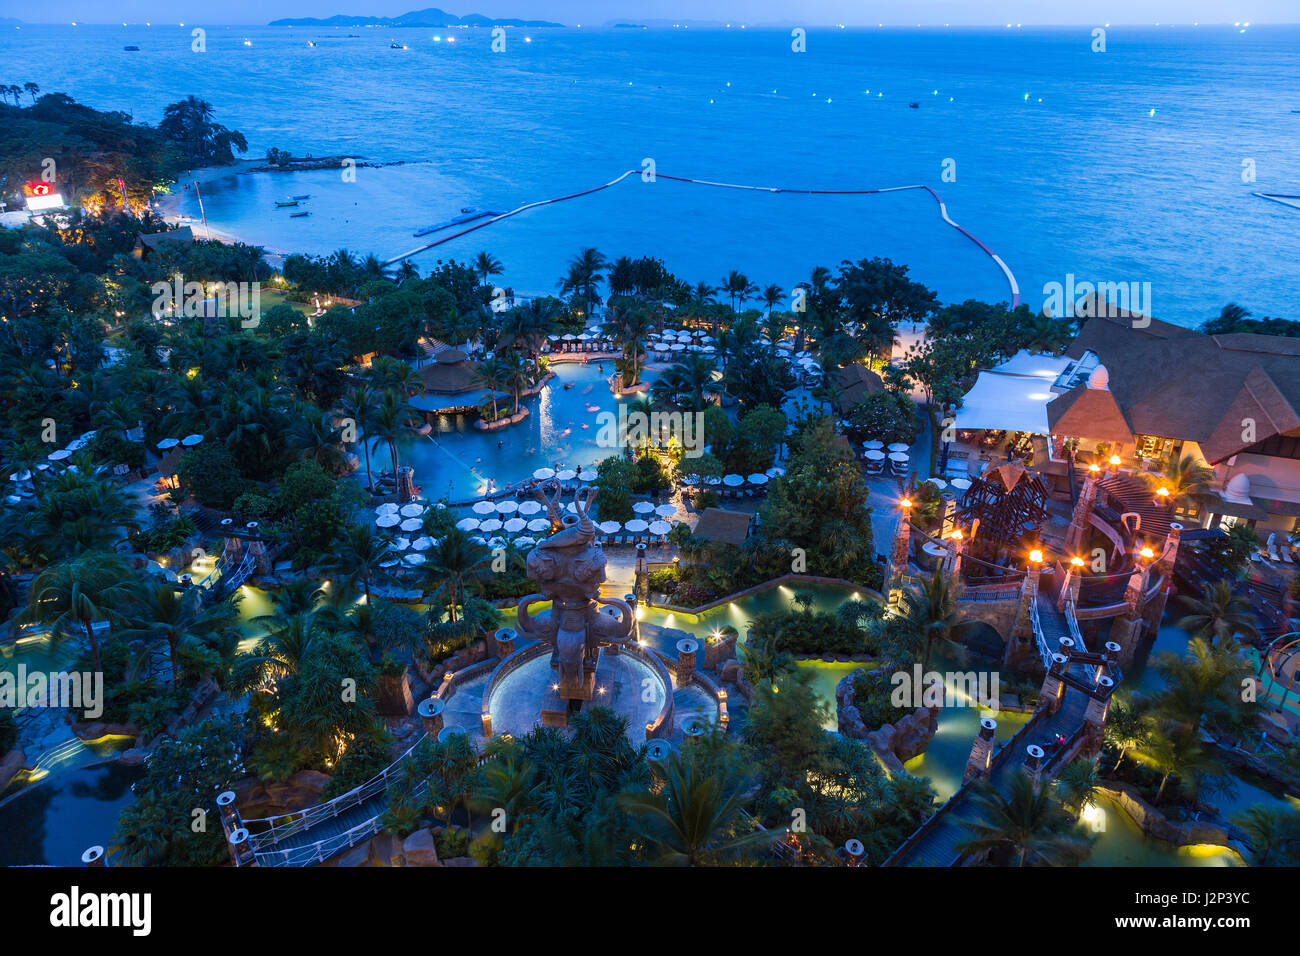 PATTAYA, THAILAND - 22 October 2016 - Aerial view of Grand Mirage hotel's water park and the ocean after sunset shows its beautiful design, in Pattaya Stock Photo